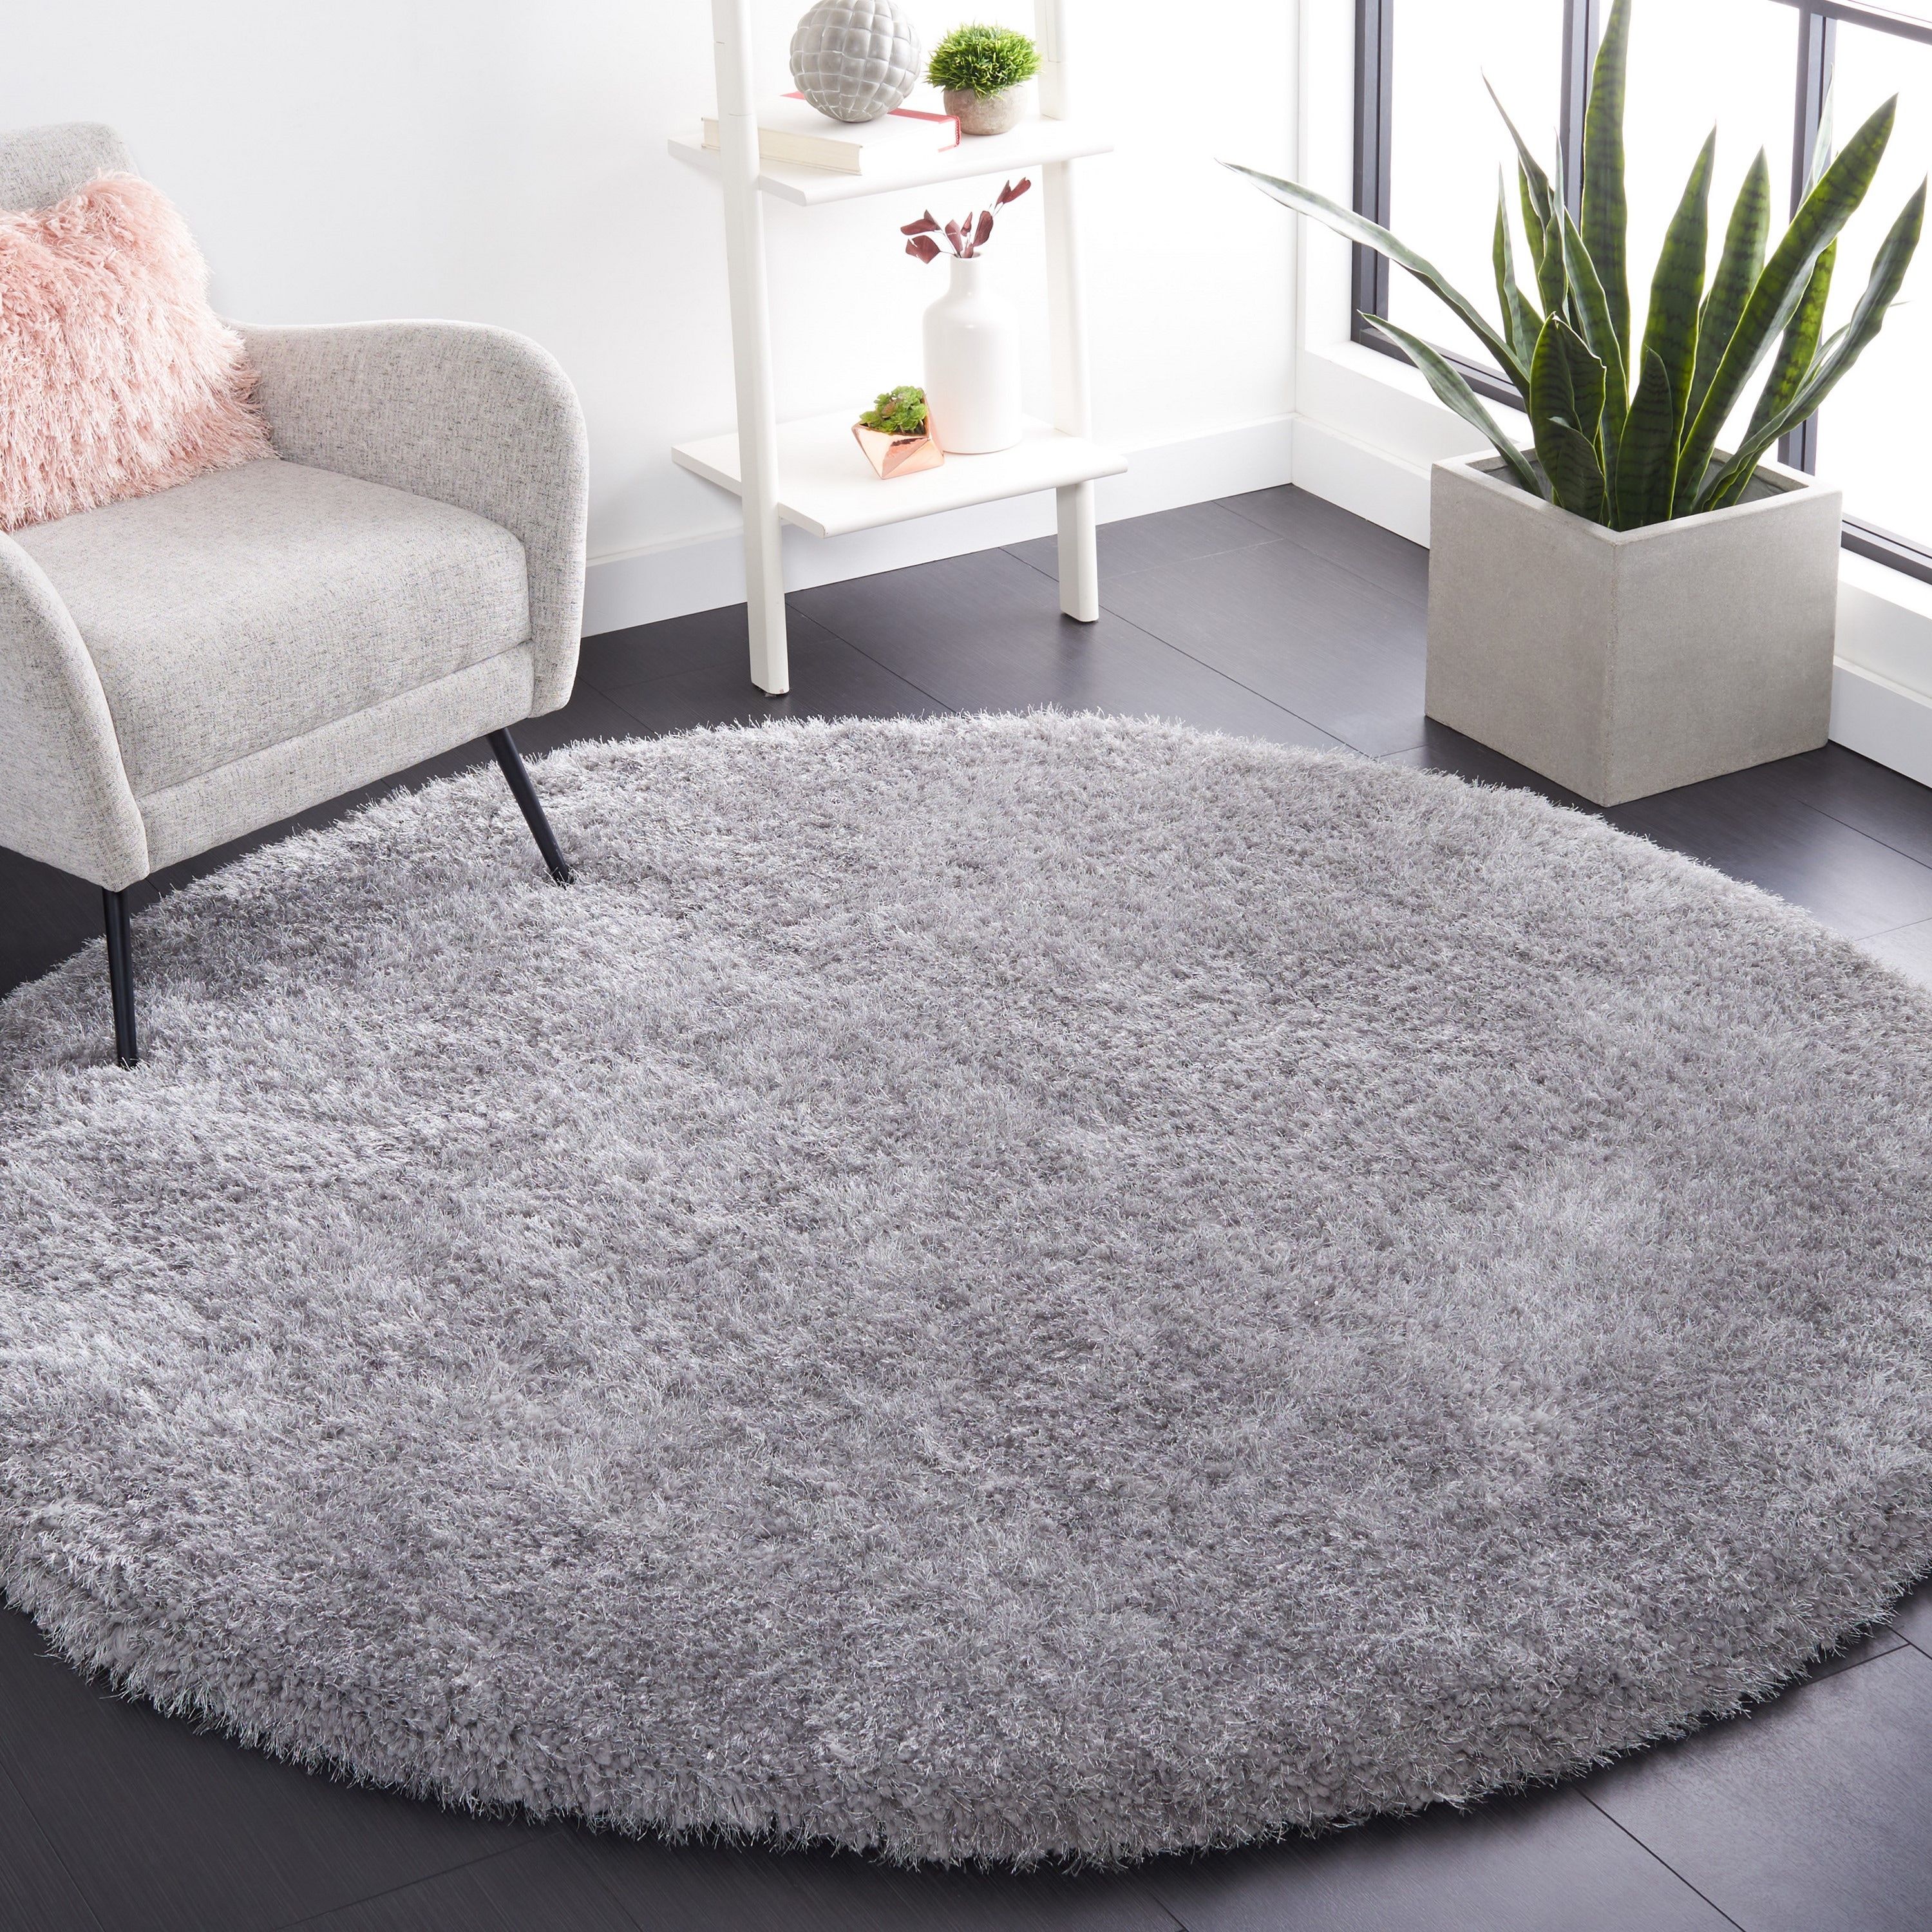 Safavieh Luxe Shag 6 X 6 Gray Round Indoor Solid Area Rug In The Rugs  Department At Lowes Pertaining To Shag Oval Rugs (View 6 of 15)